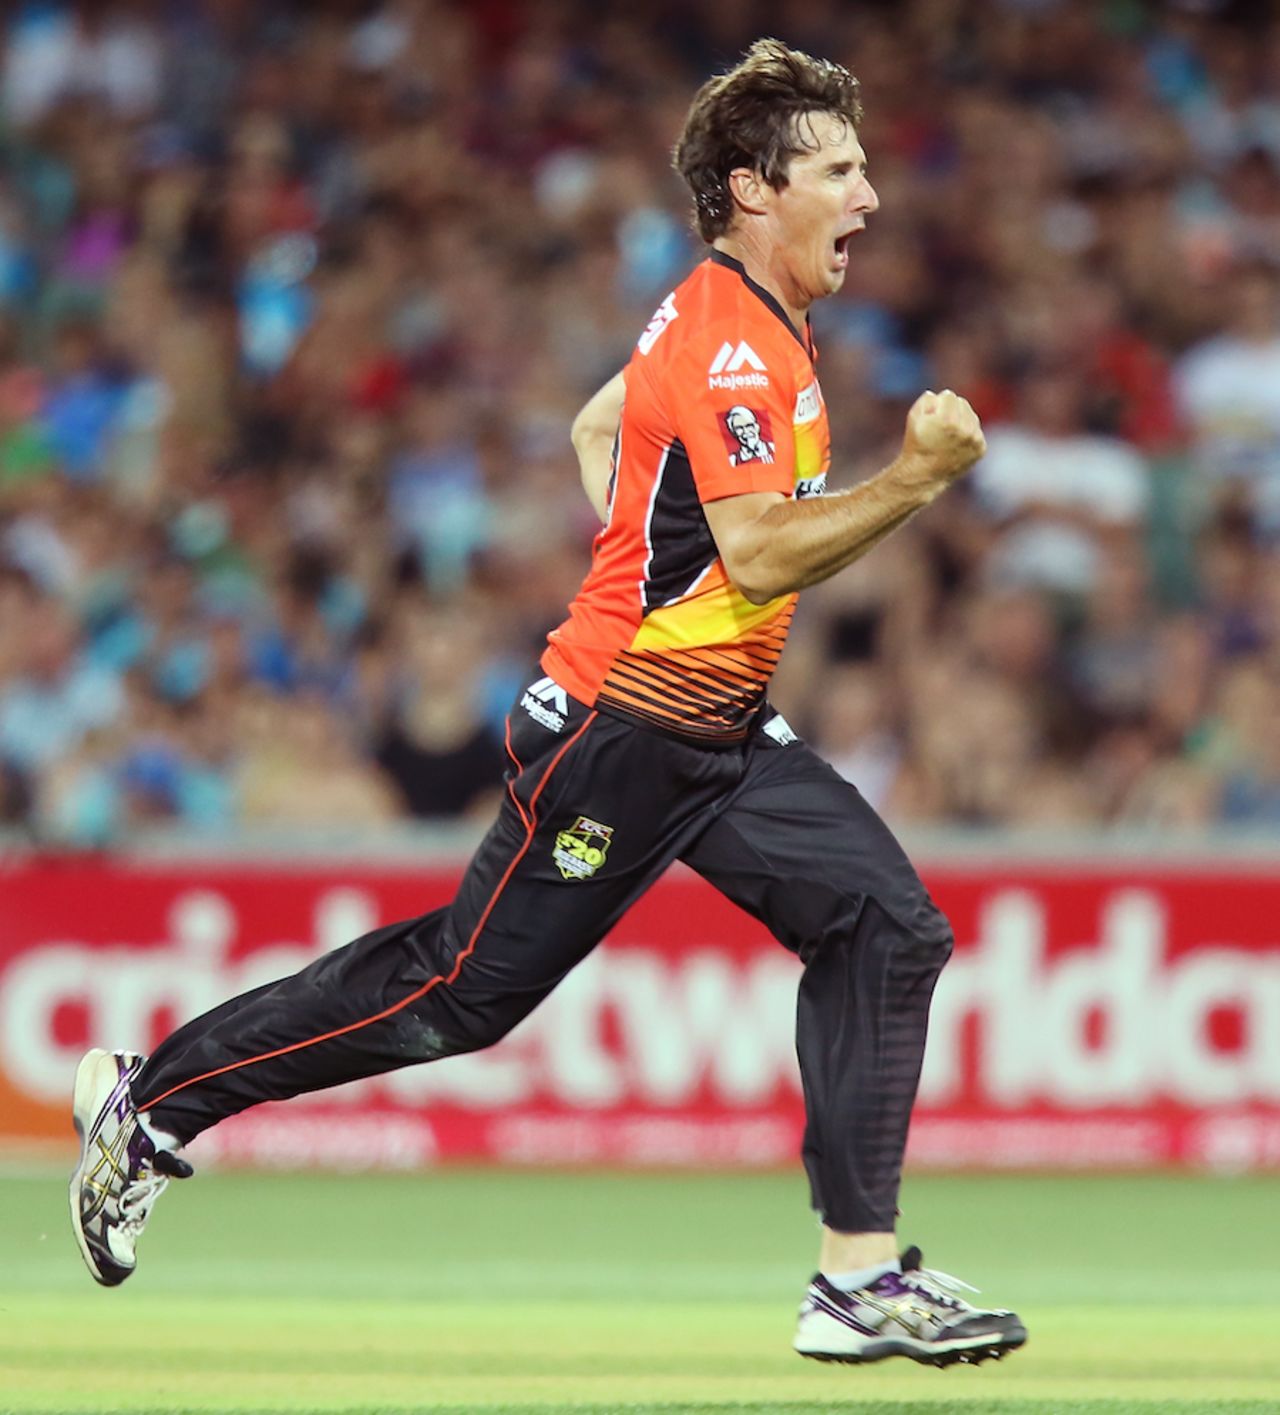 Brad Hogg produced frugal figures of 2 for 11 from four overs, Adelaide Strikers v Perth Scorchers, Big Bash League 2014-15, Adelaide, January 6, 2015